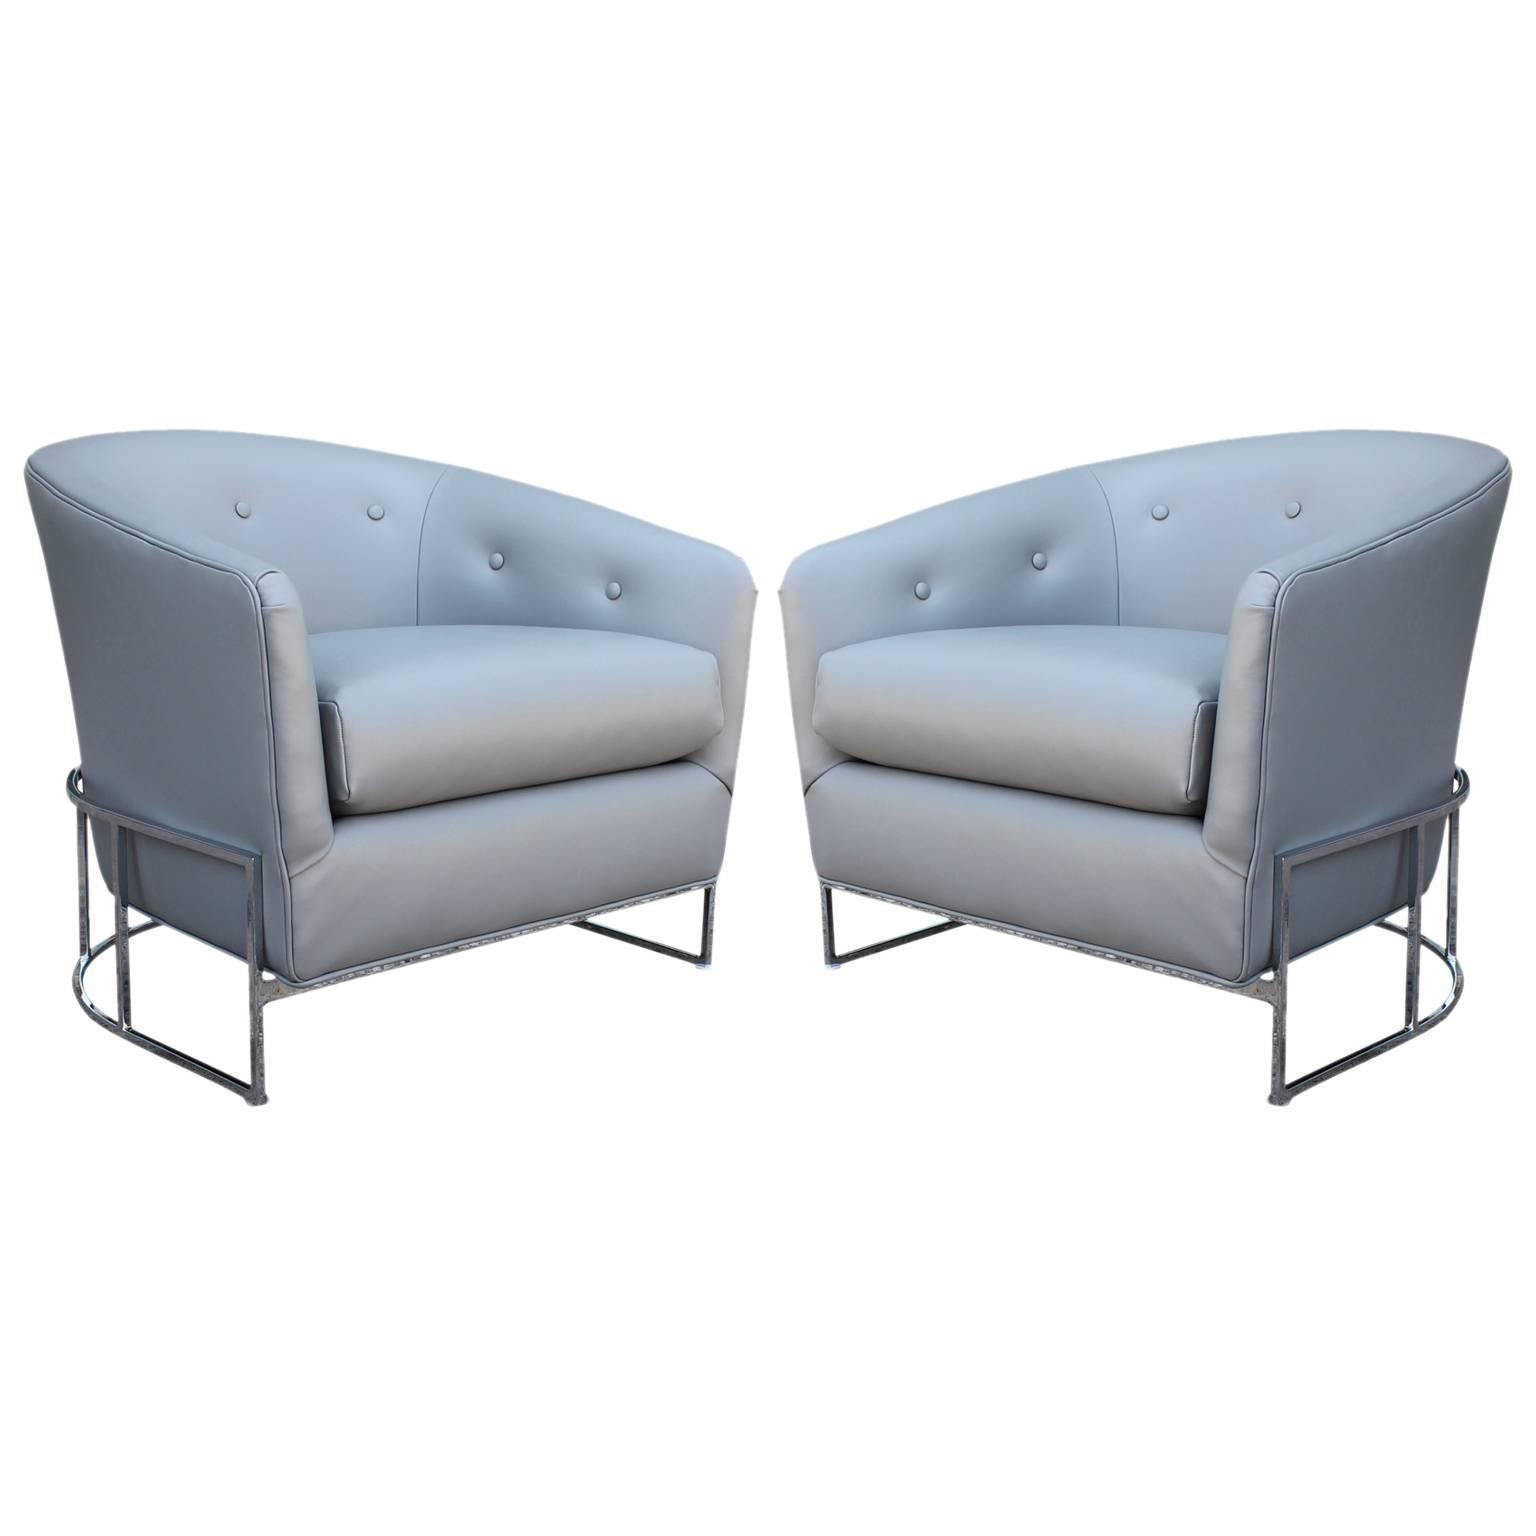 Pair of Milo Baughman Barrel Back Modern Club Chairs in Grey Leather